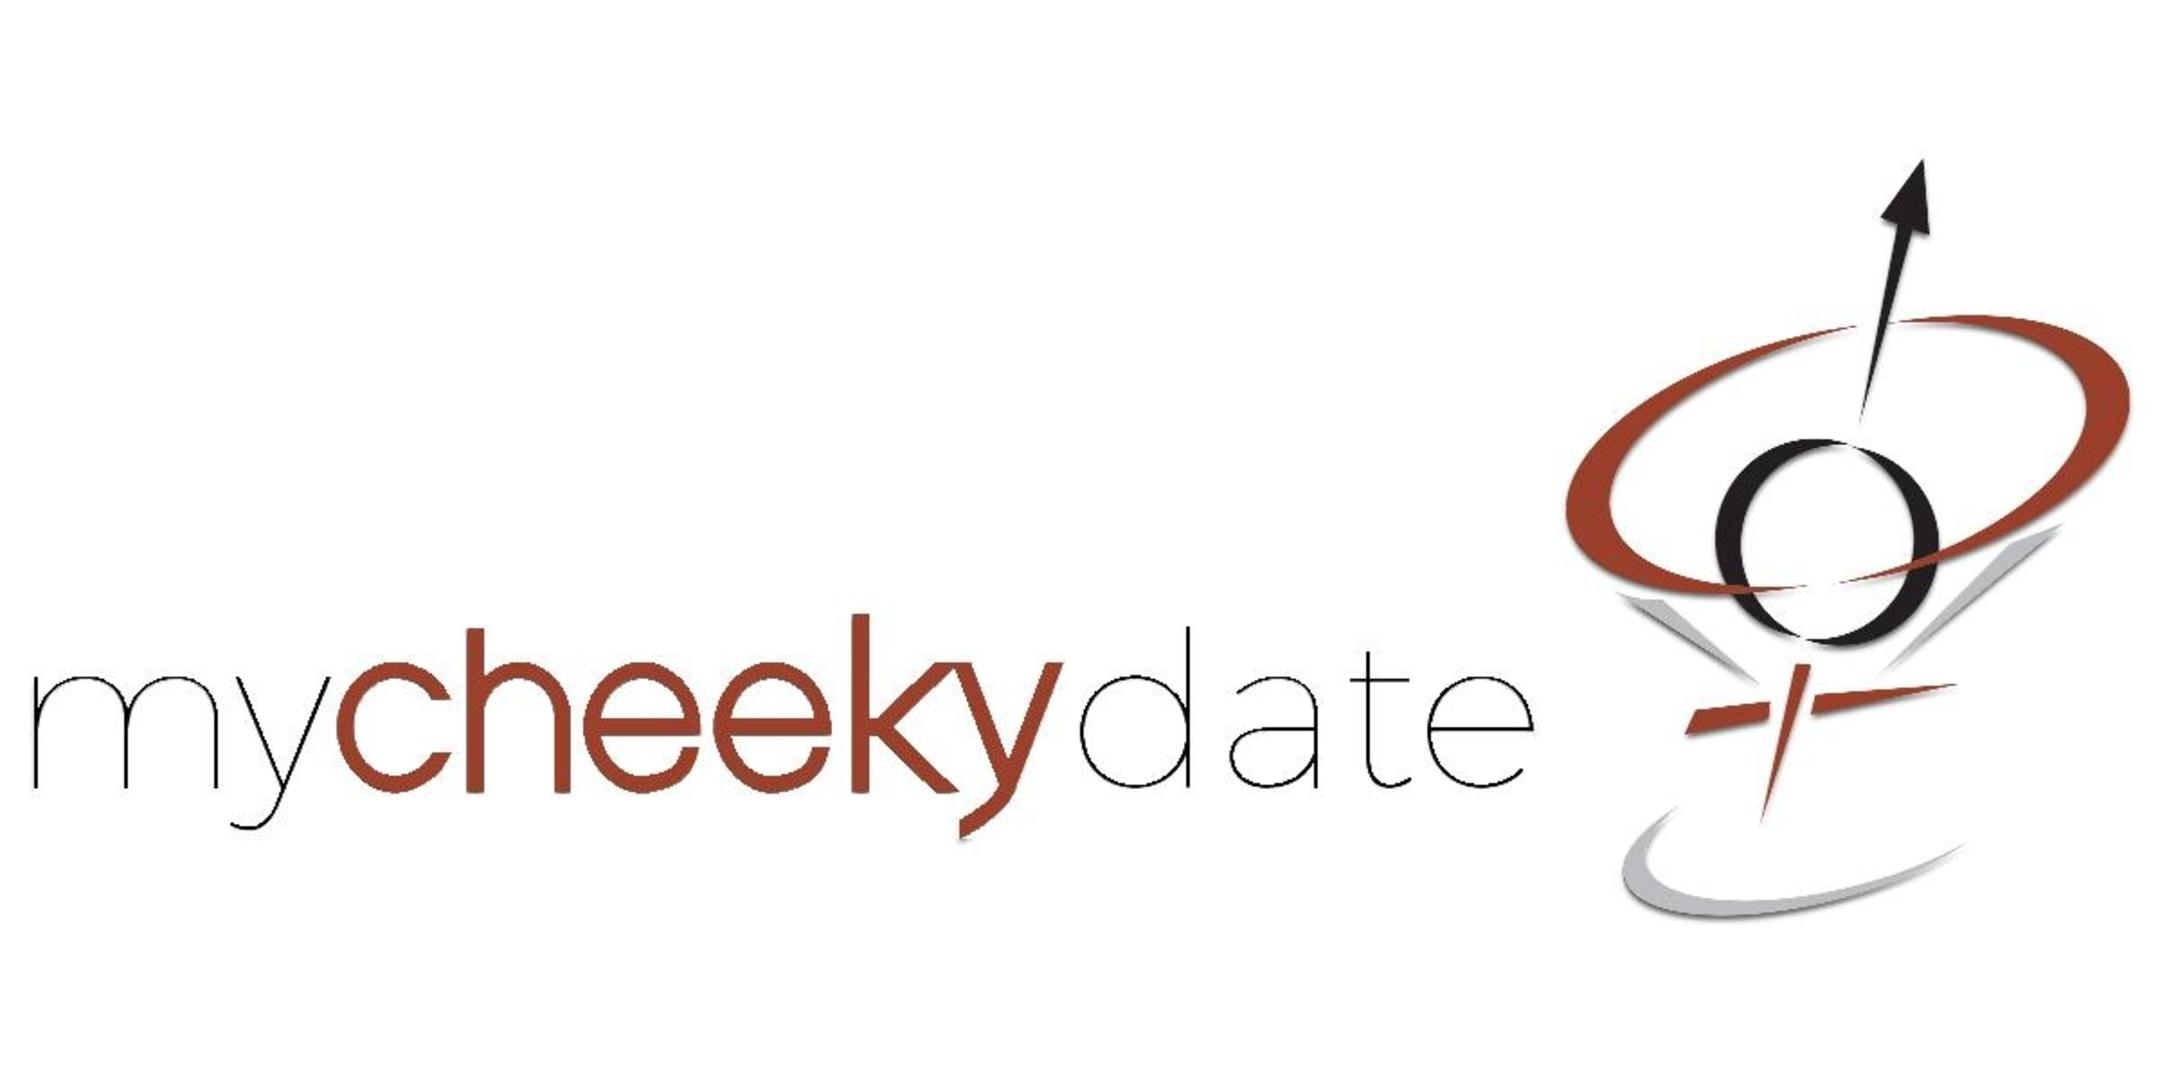 Speed Dating UK Style in DC | Singles Events in Washington DC | Let's Get Cheeky!